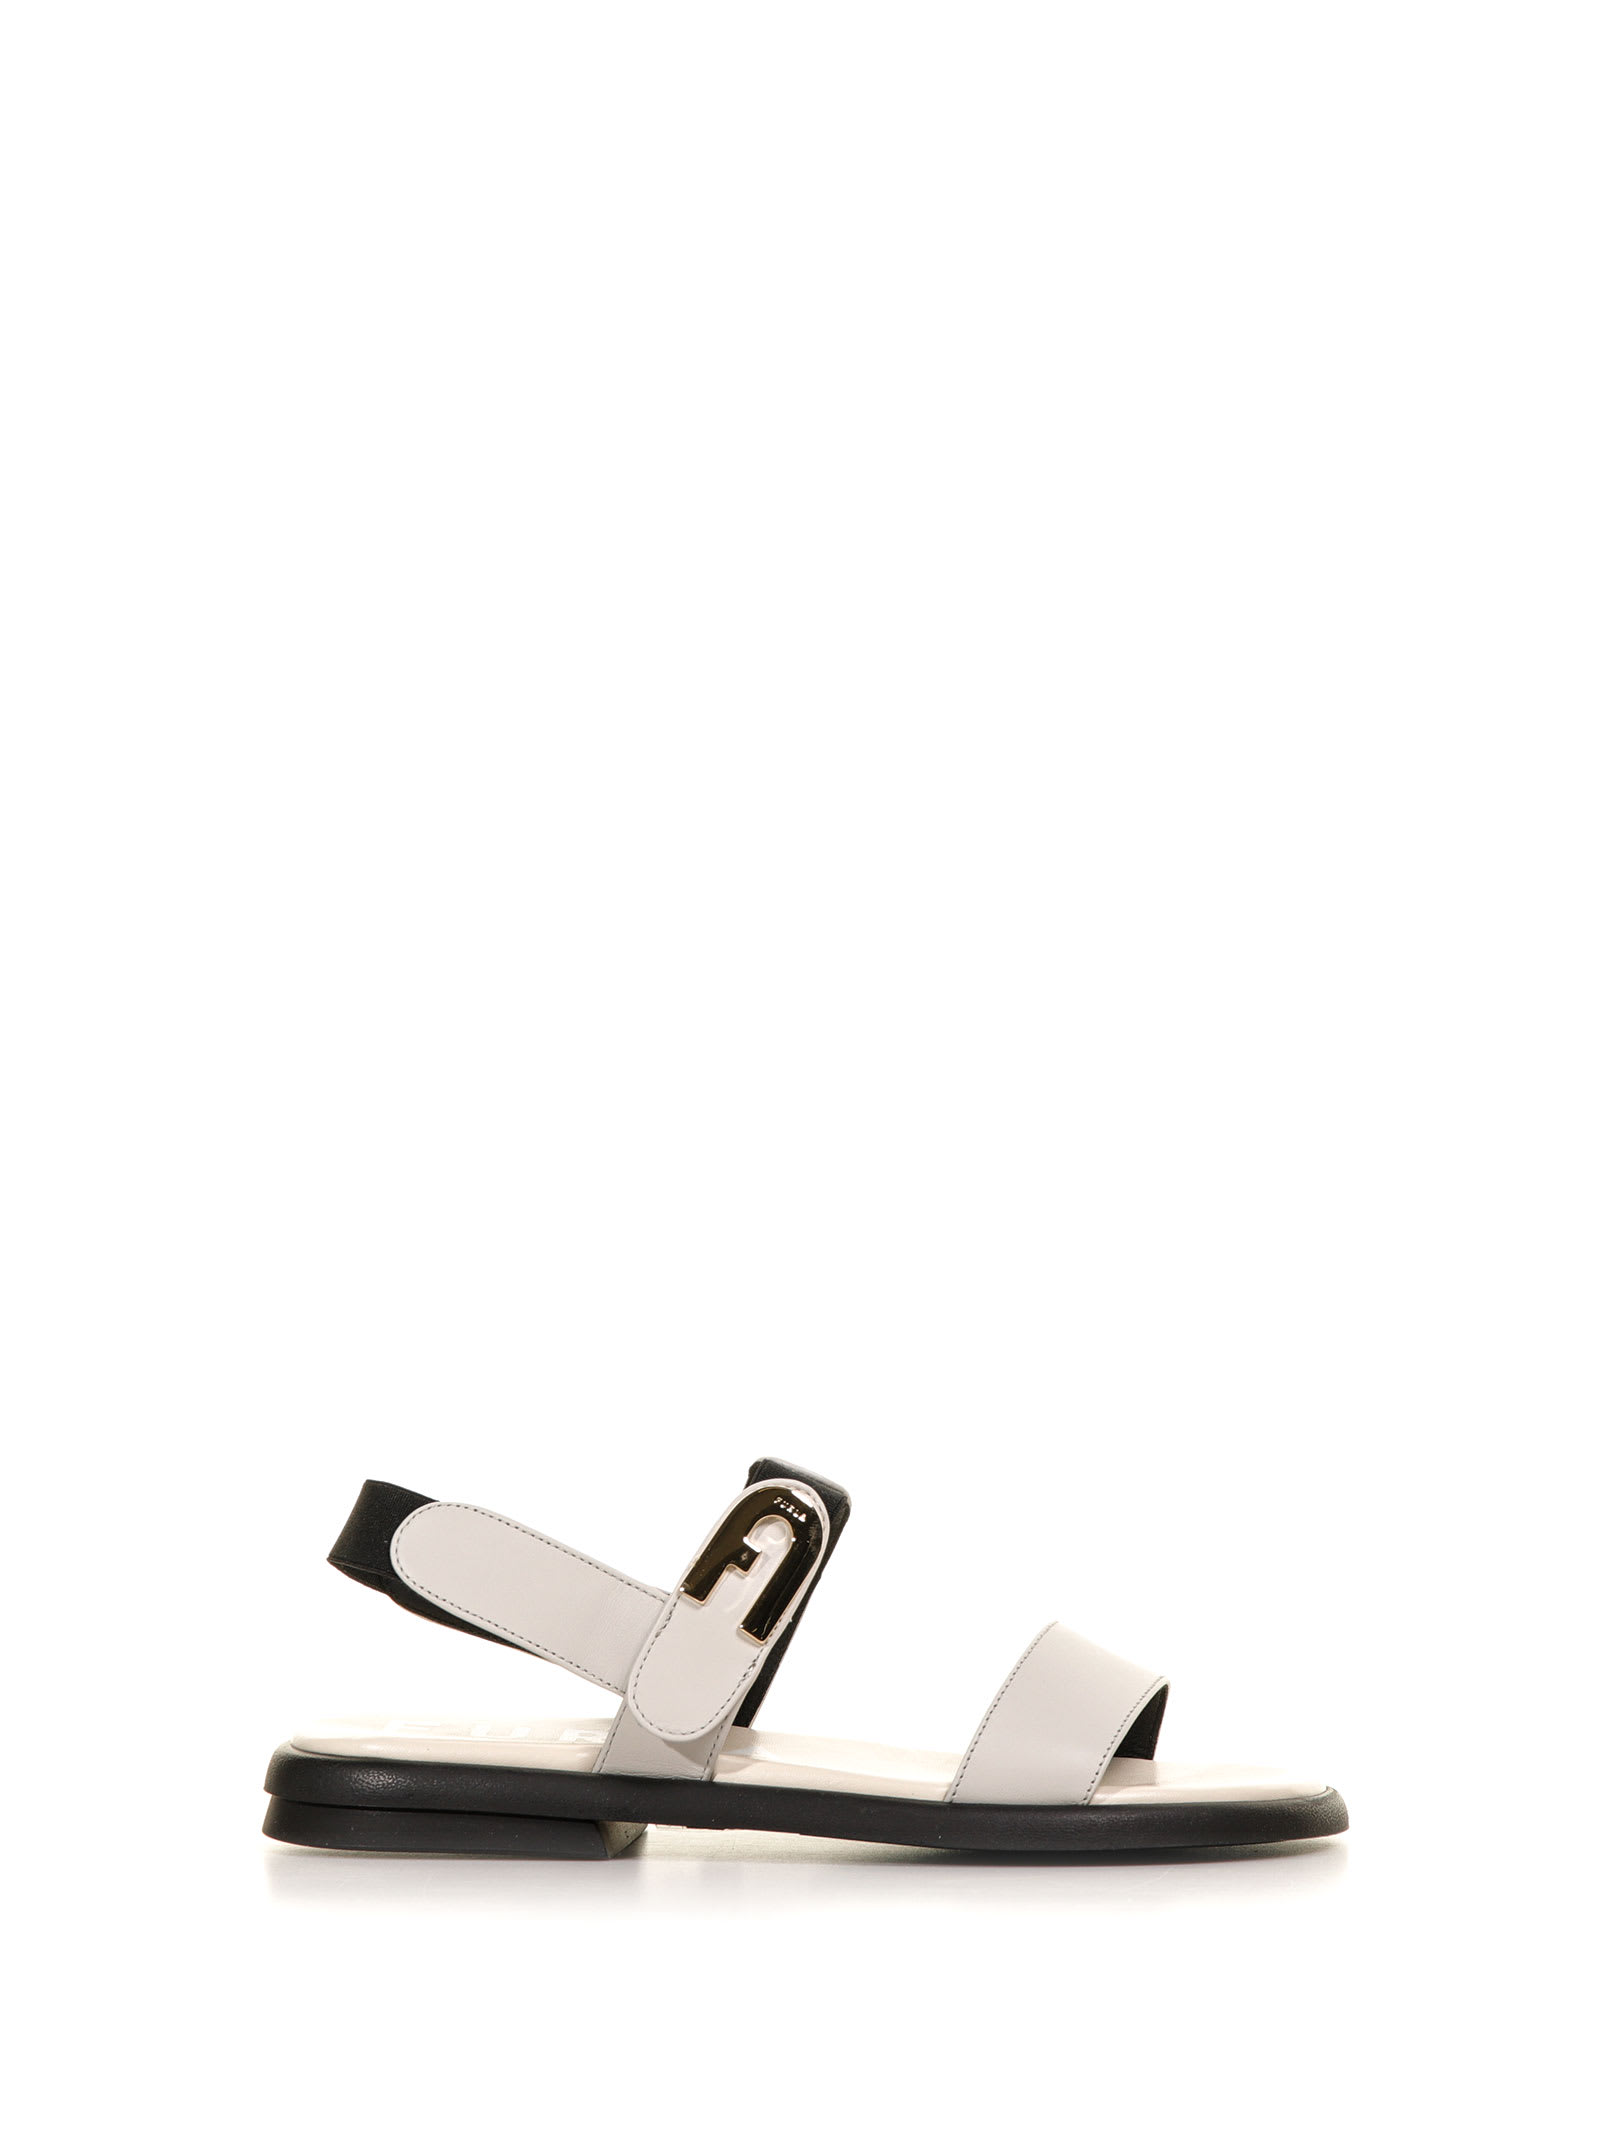 FURLA DOUBLE BAND SANDAL IN LEATHER